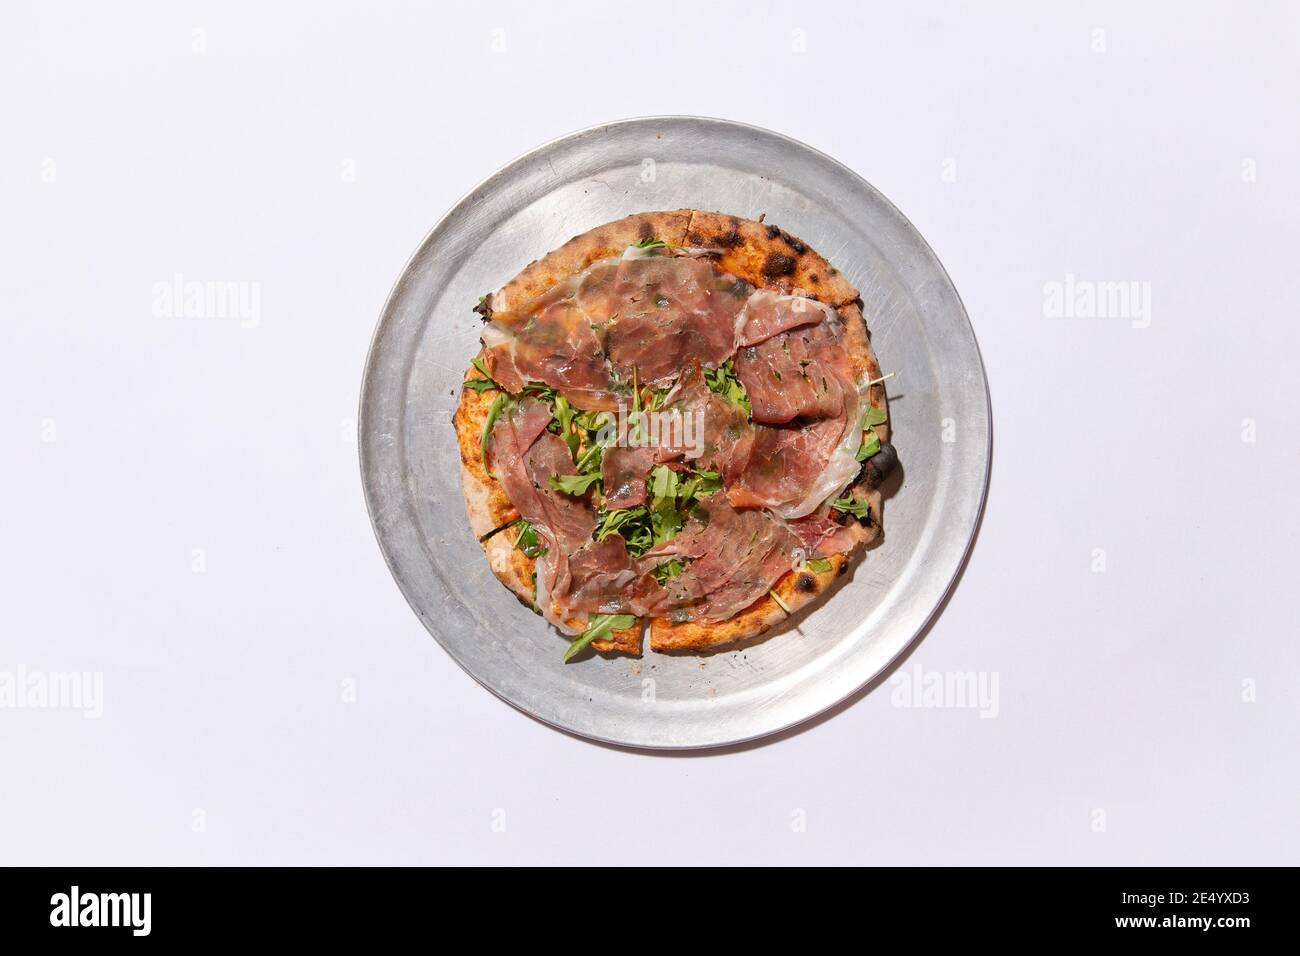 High Angle View of Brick Oven Pizza with Prosciutto and Arugula Stock Photo